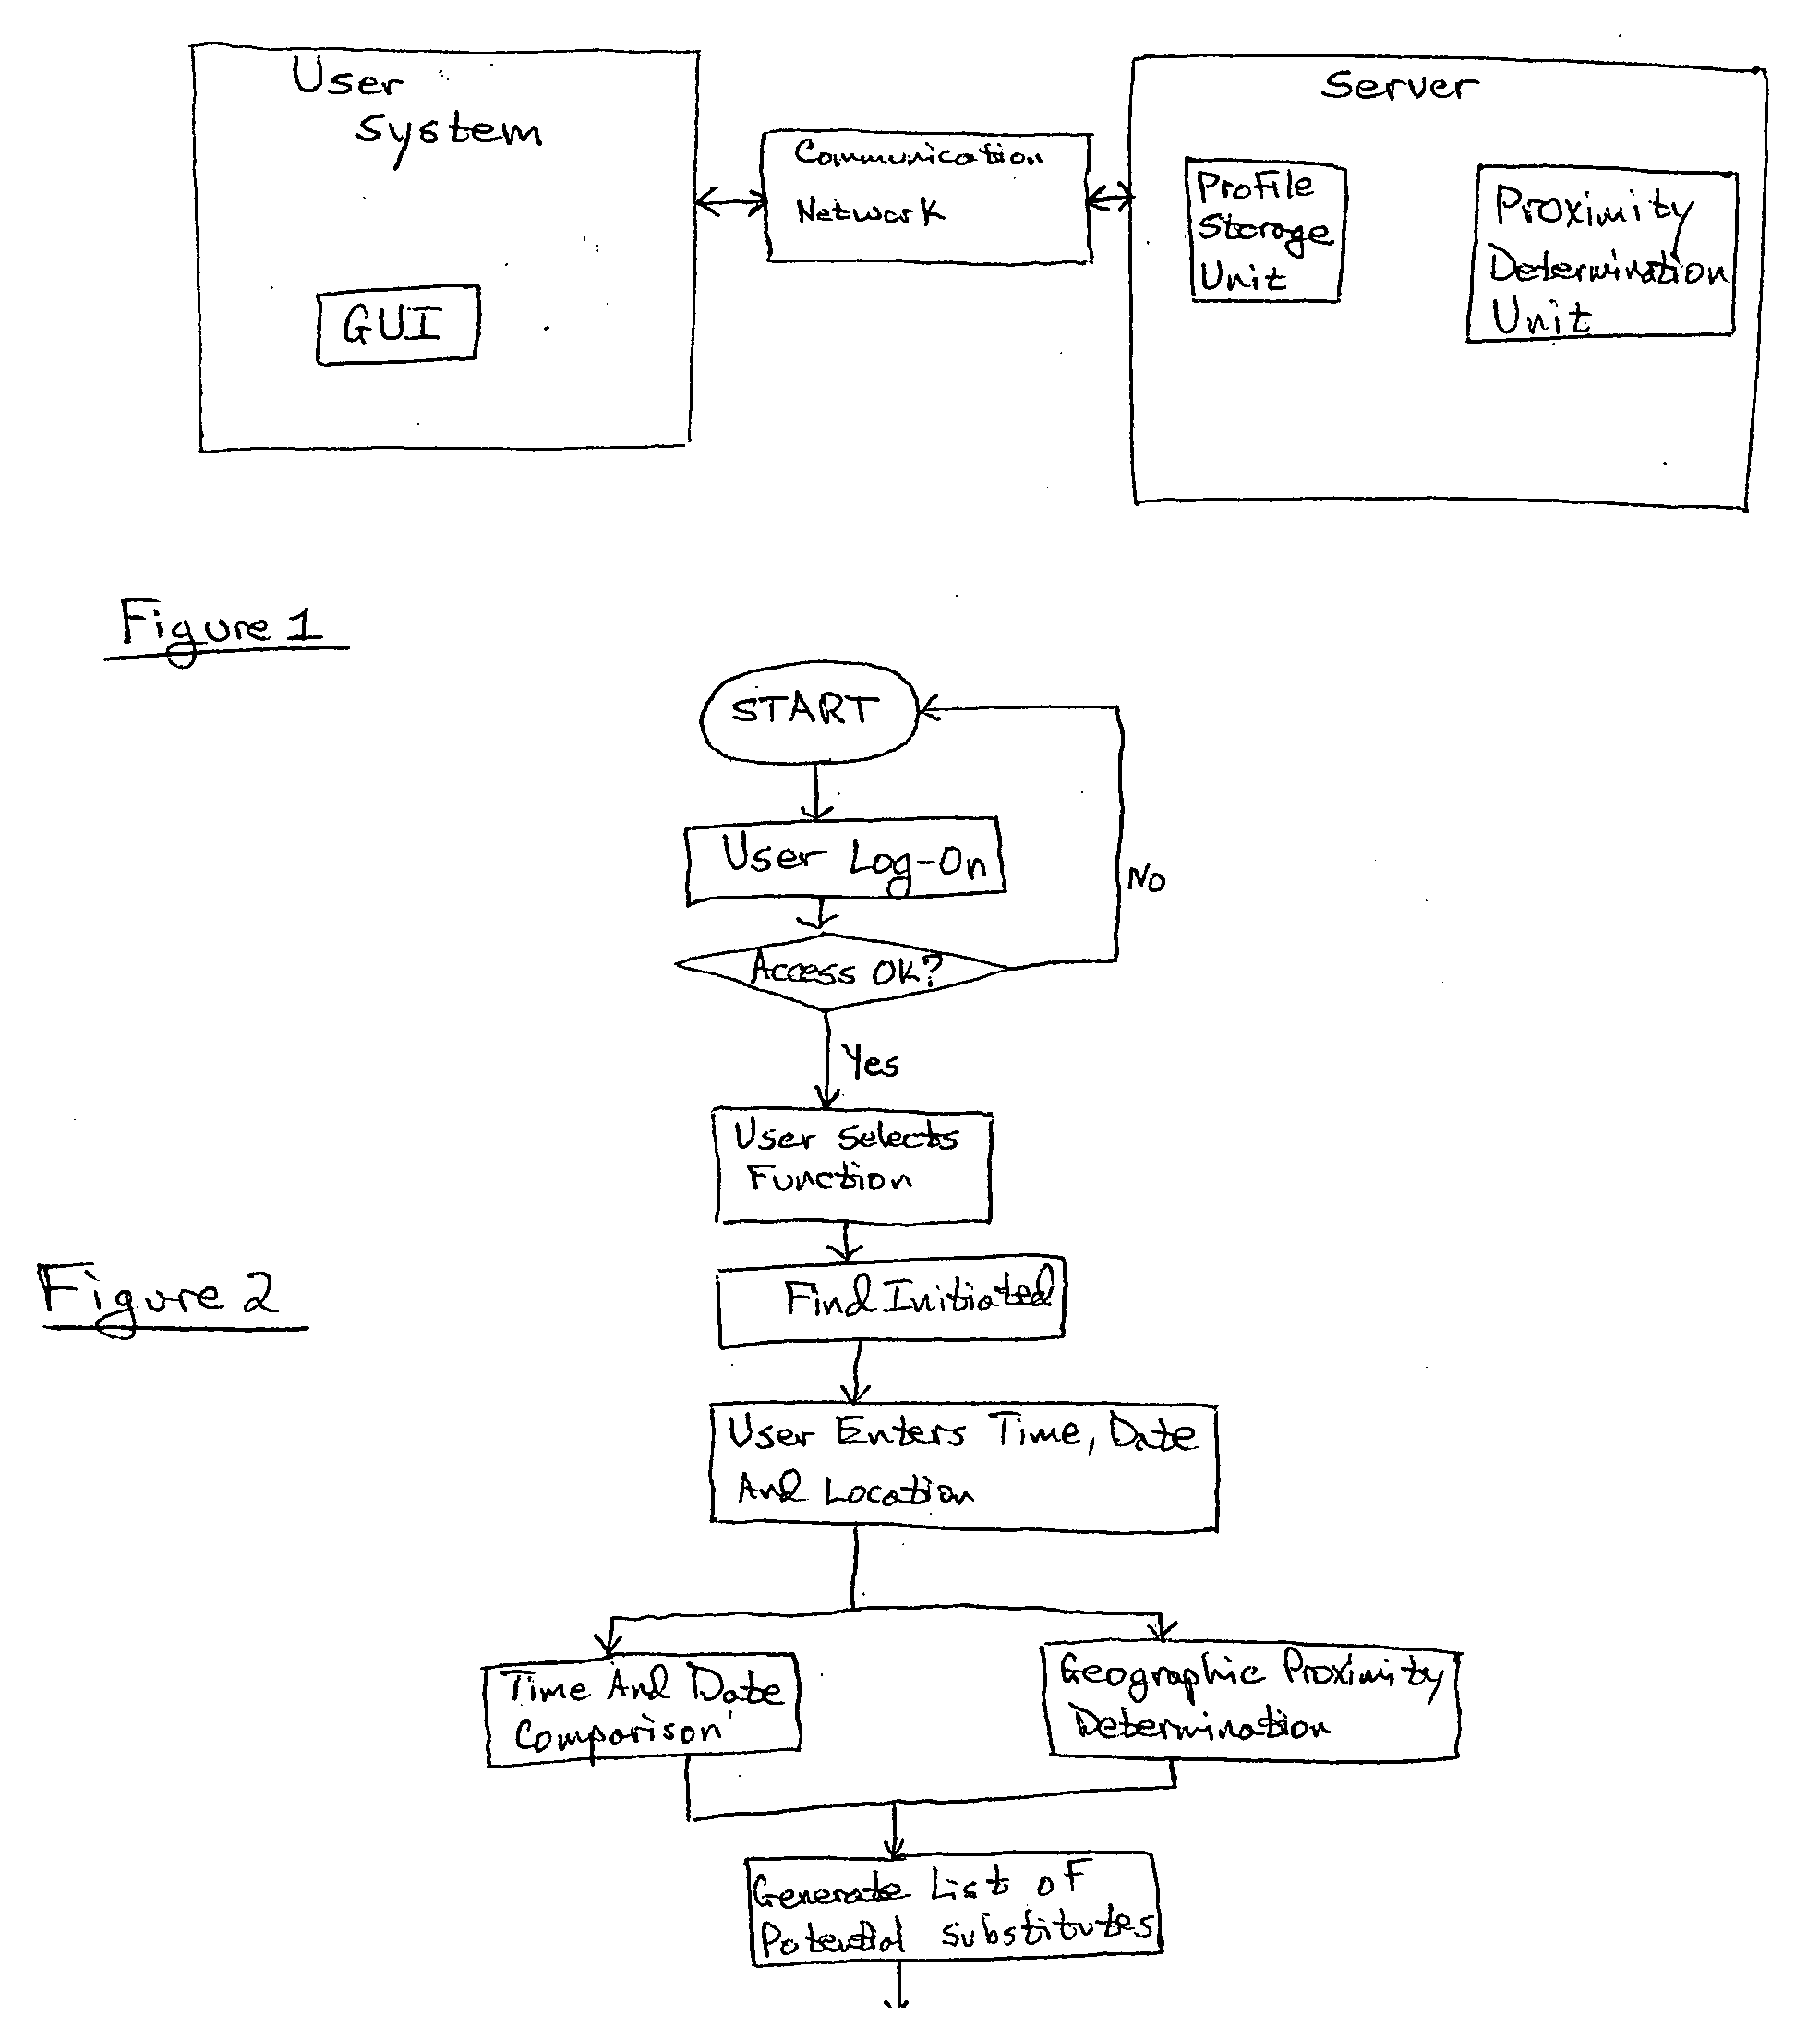 Method of scheduling appointment coverage for service professionals